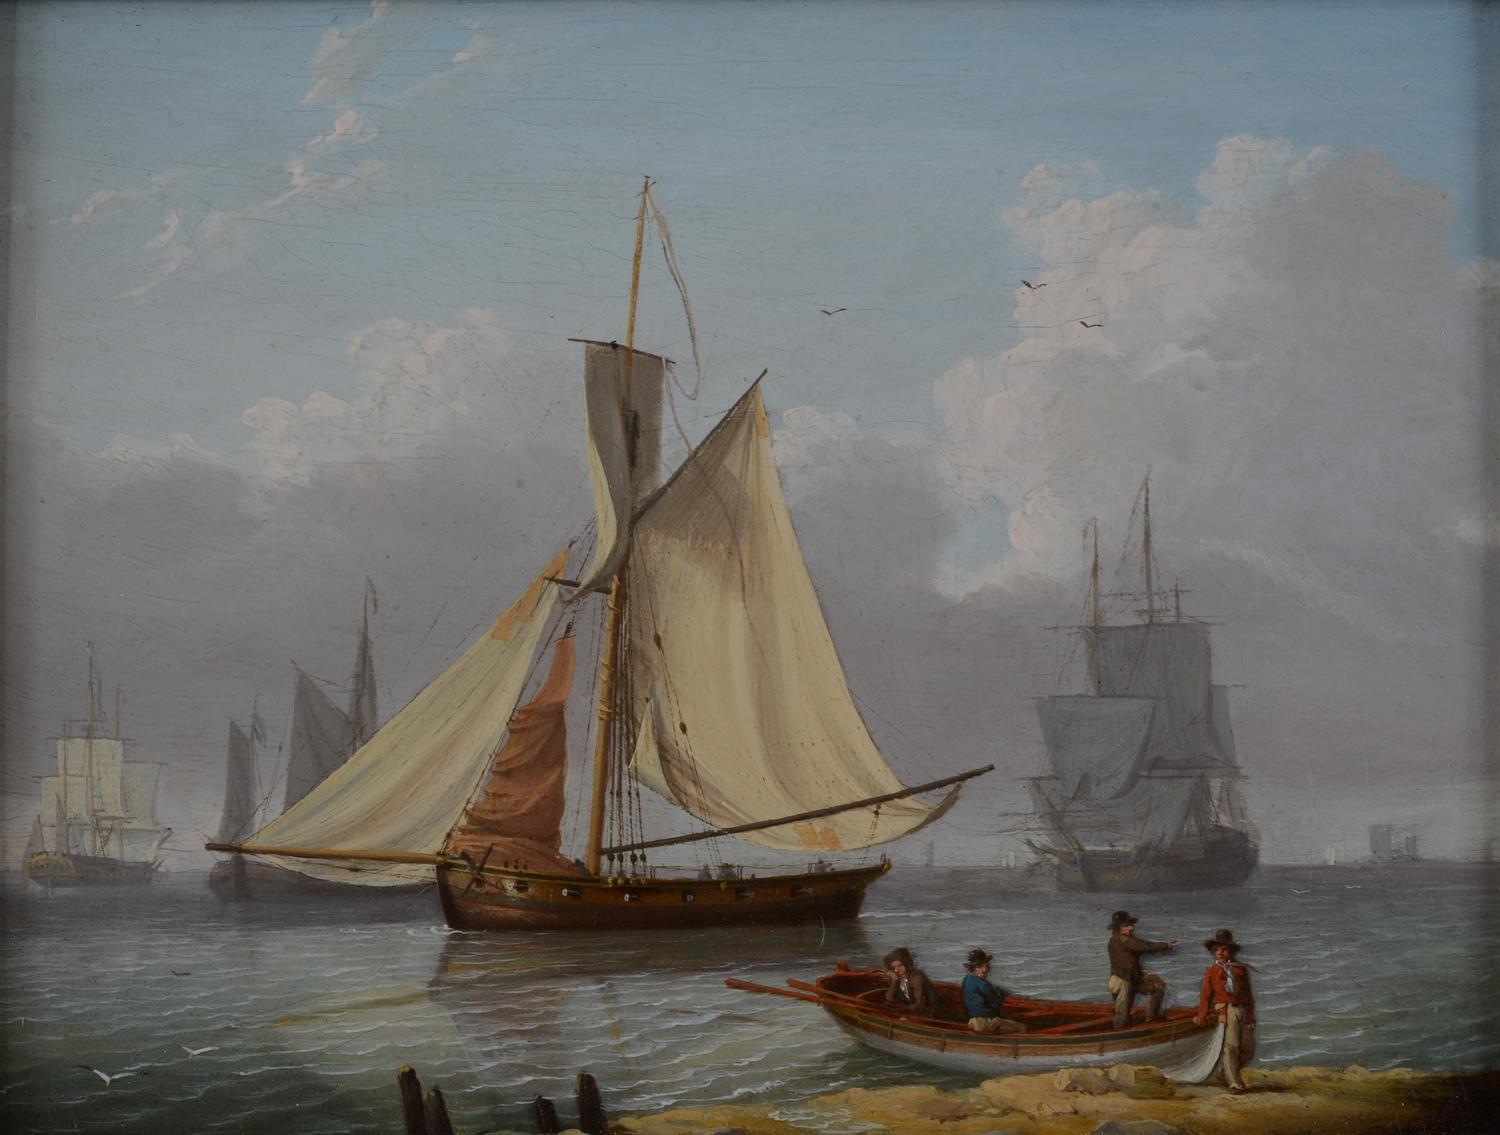 William Anderson Landscape Painting - "Shipping off the Coast, " (possibly Isle of Wight)